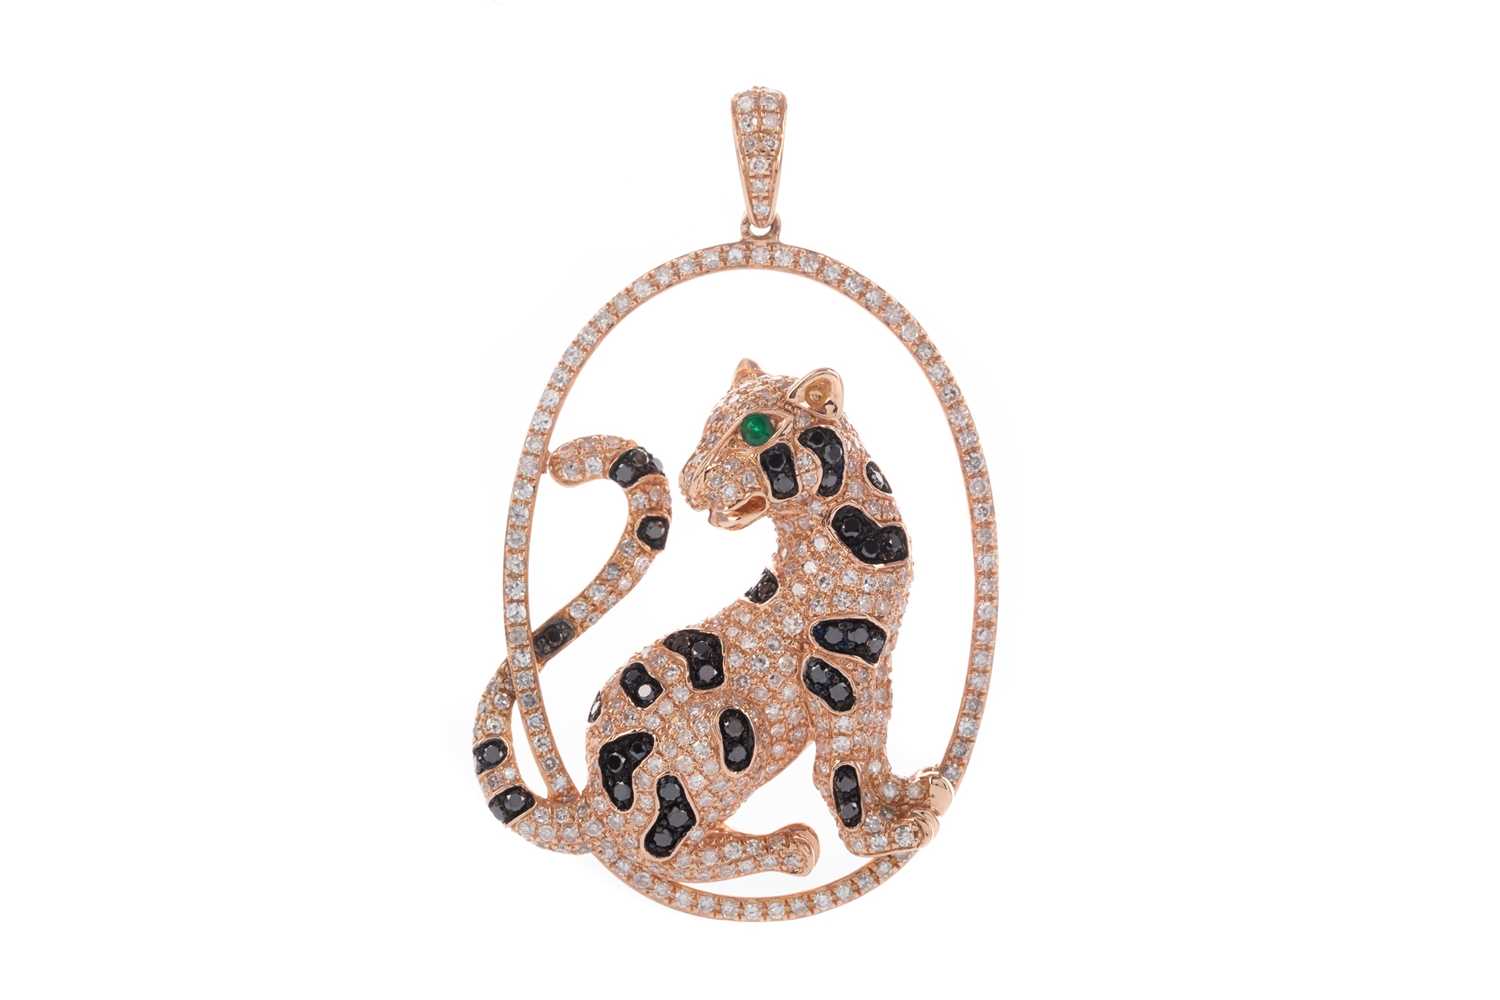 Lot 502 - A ROSE GOLD DIAMOND AND EMERALD PANTHER PENDANT